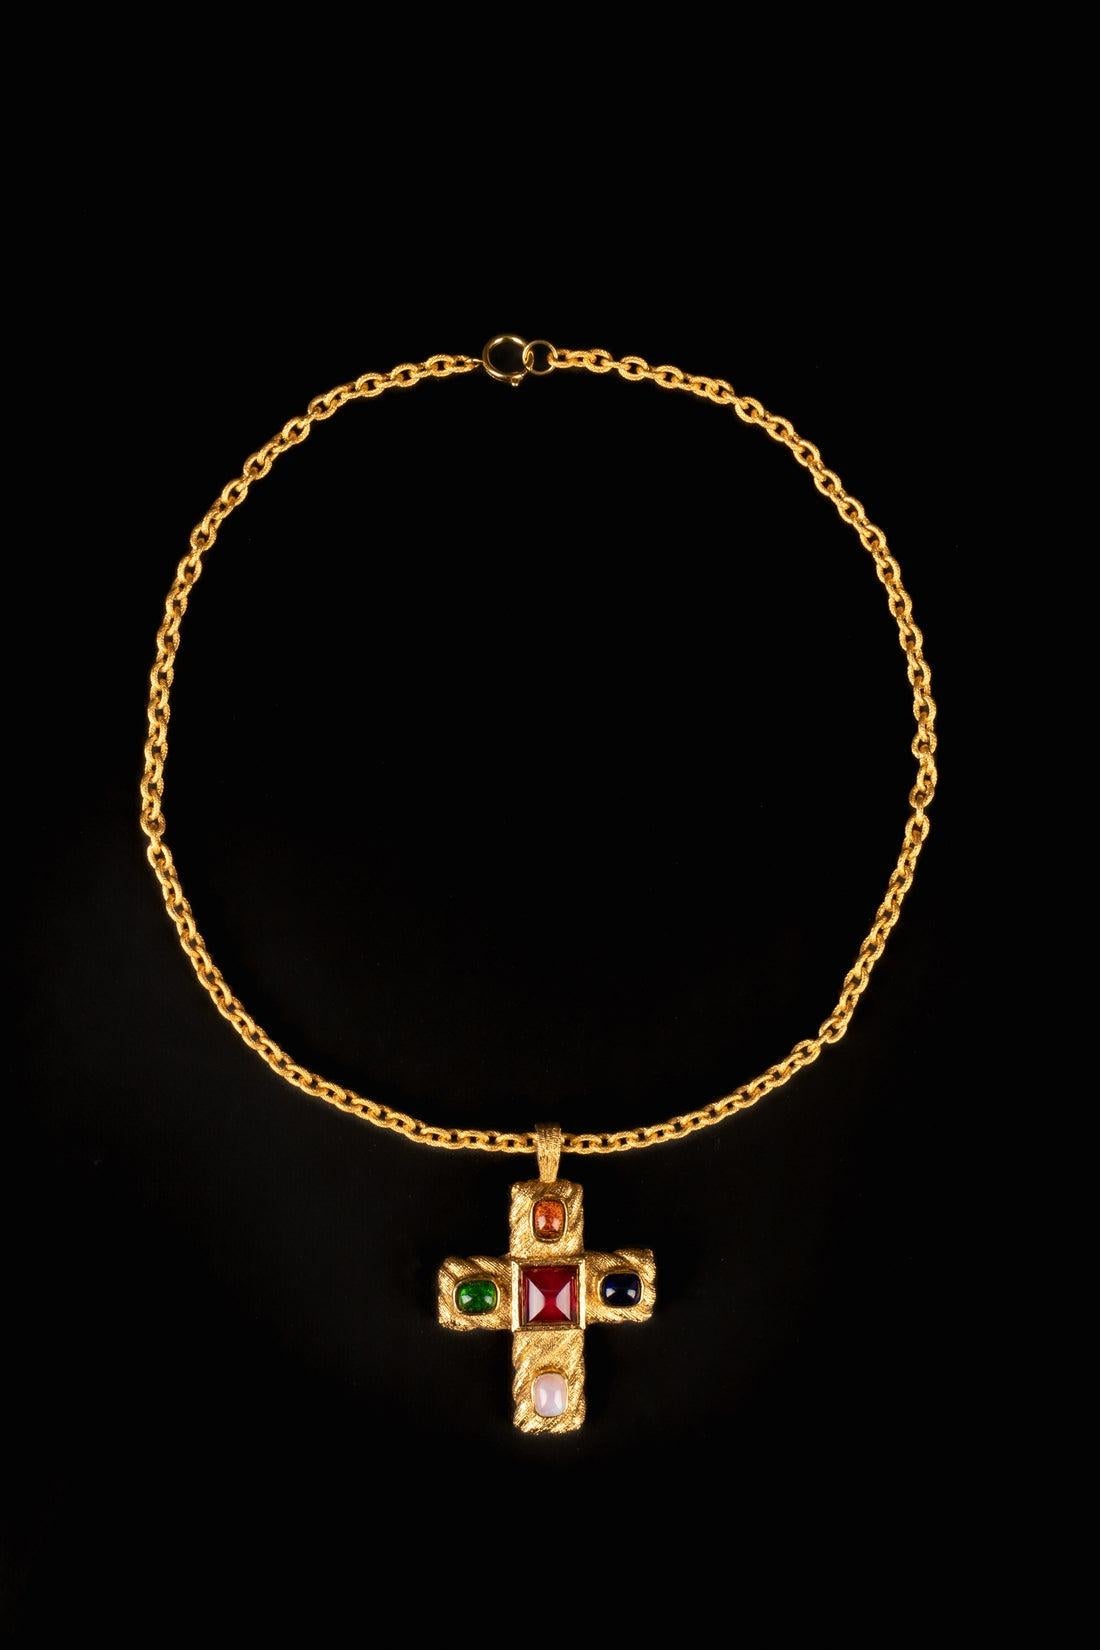 Chanel - (Made in France) Golden metal chain necklace holding a golden metal cross pendant with glass paste. 2cc5 Collection.

Additional information:
Condition: Very good condition
Dimensions: Length: 81 cm

Seller Reference: CB11